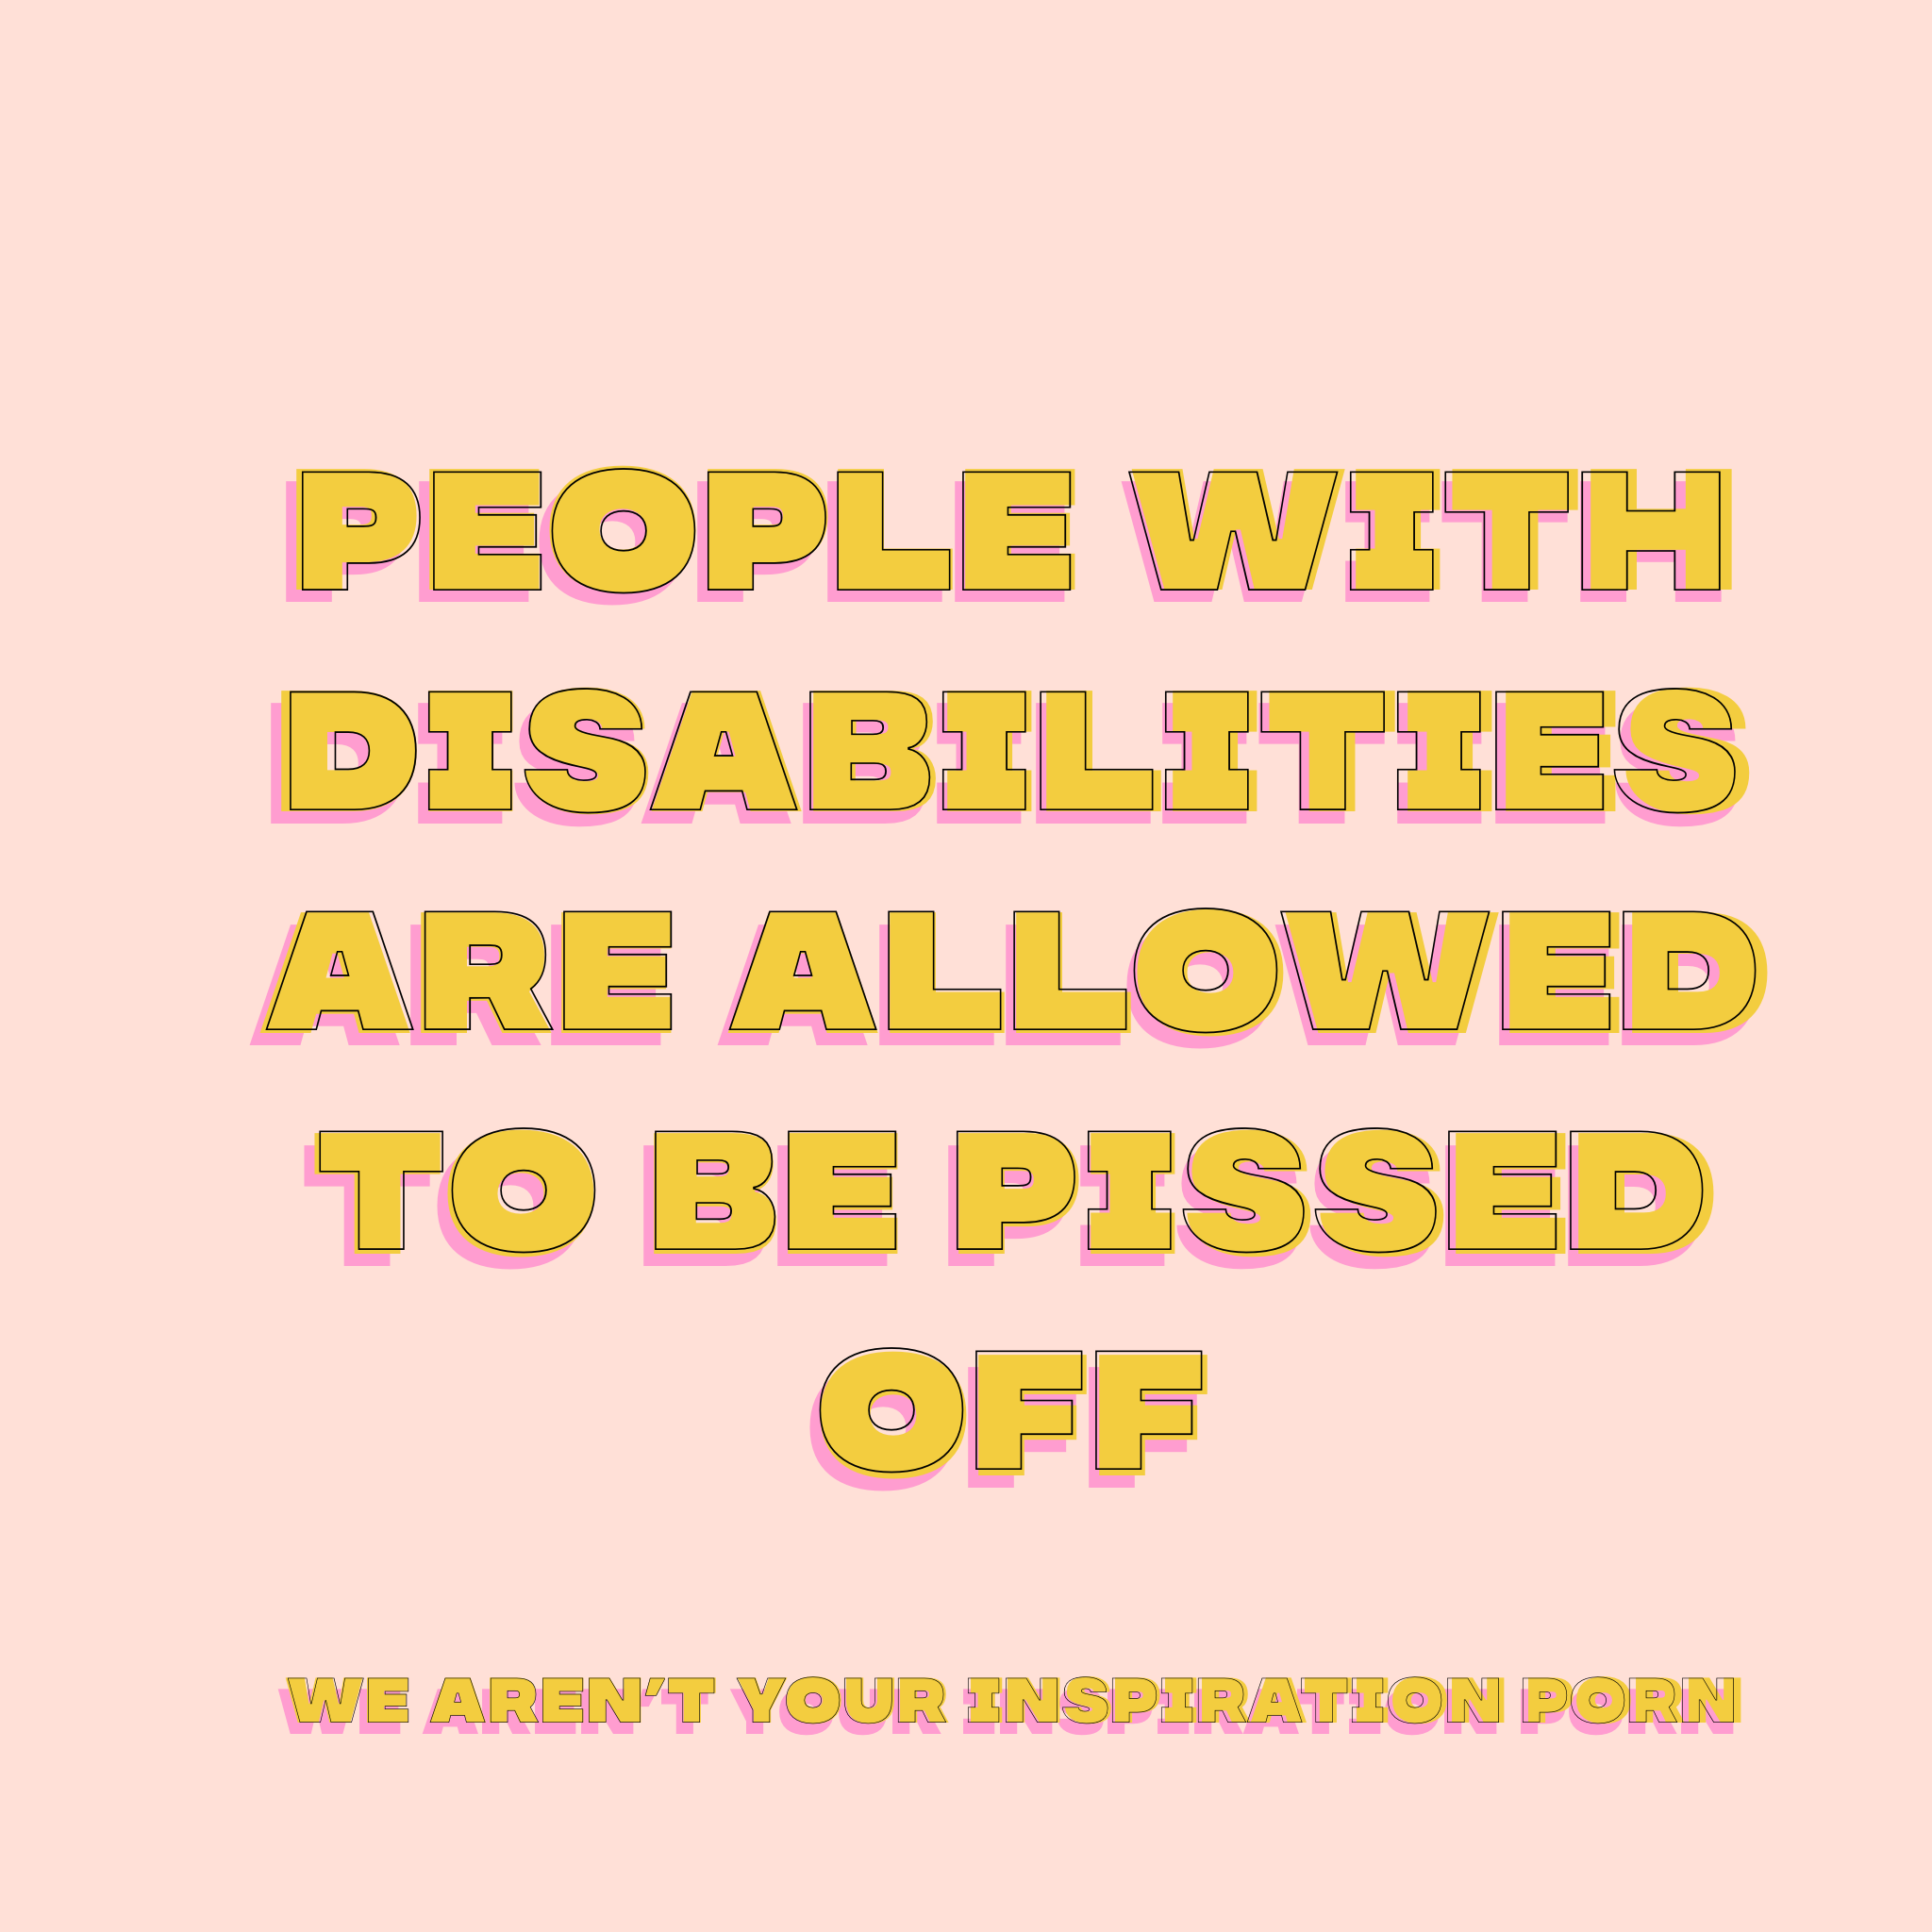 People with disabilities are allowed to be pissed off.